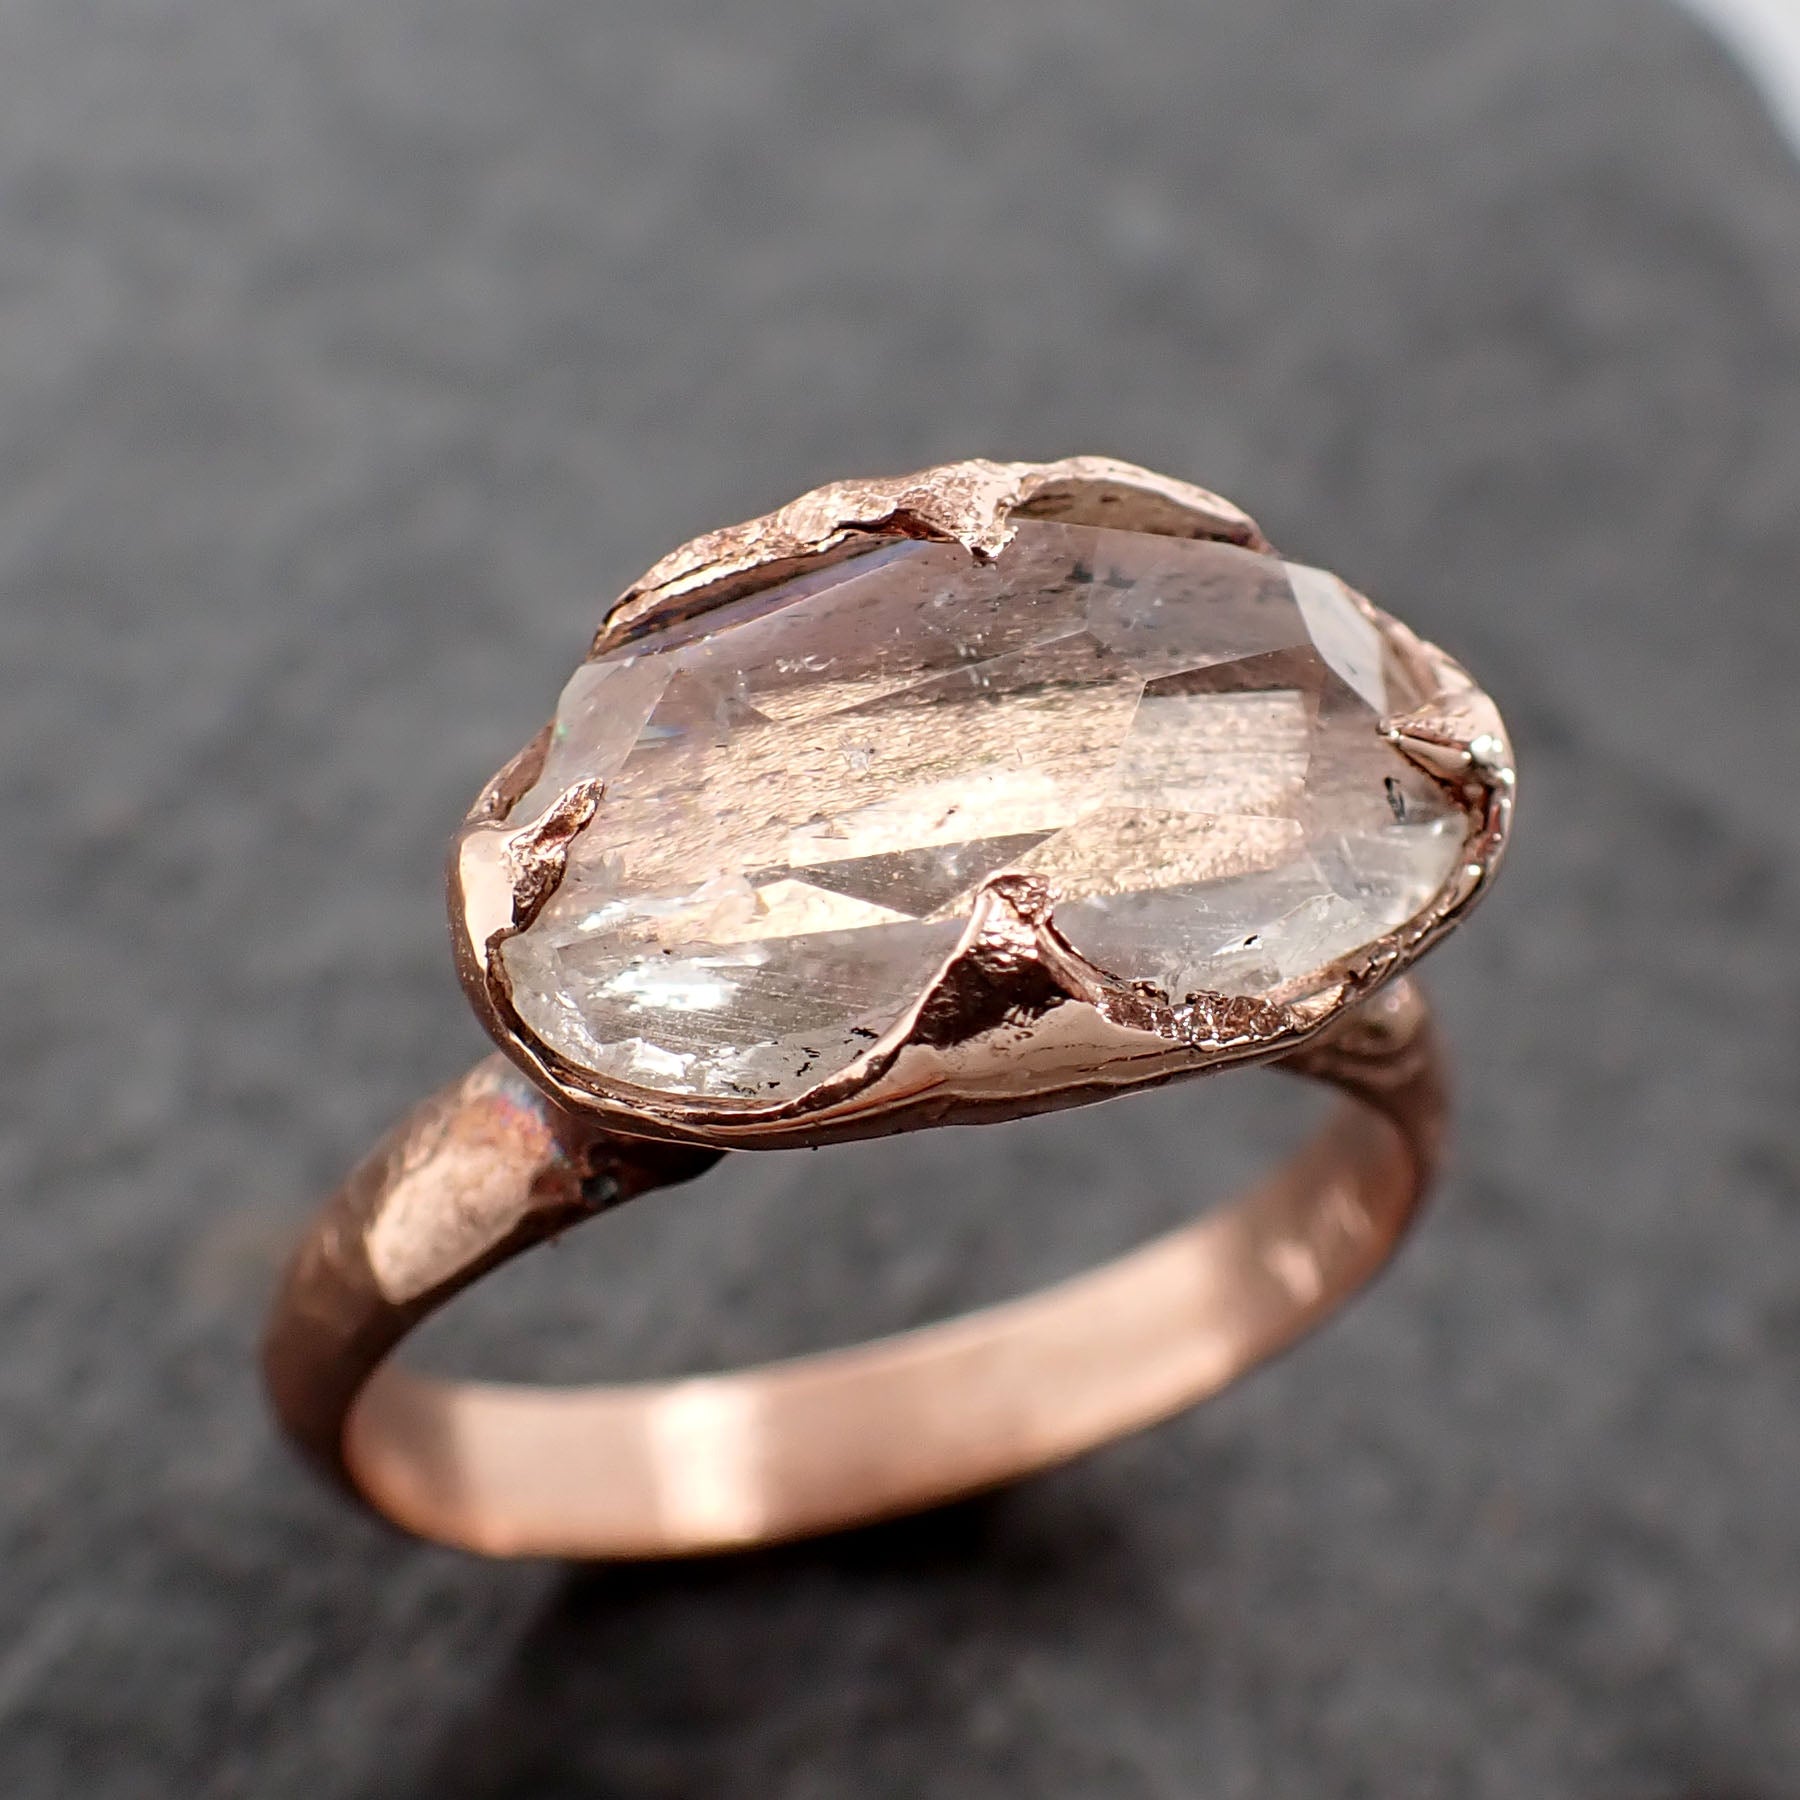 Partially Faceted Moonstone Rose Gold Ring Gemstone Solitaire recycled 14k statement cocktail statement 2542